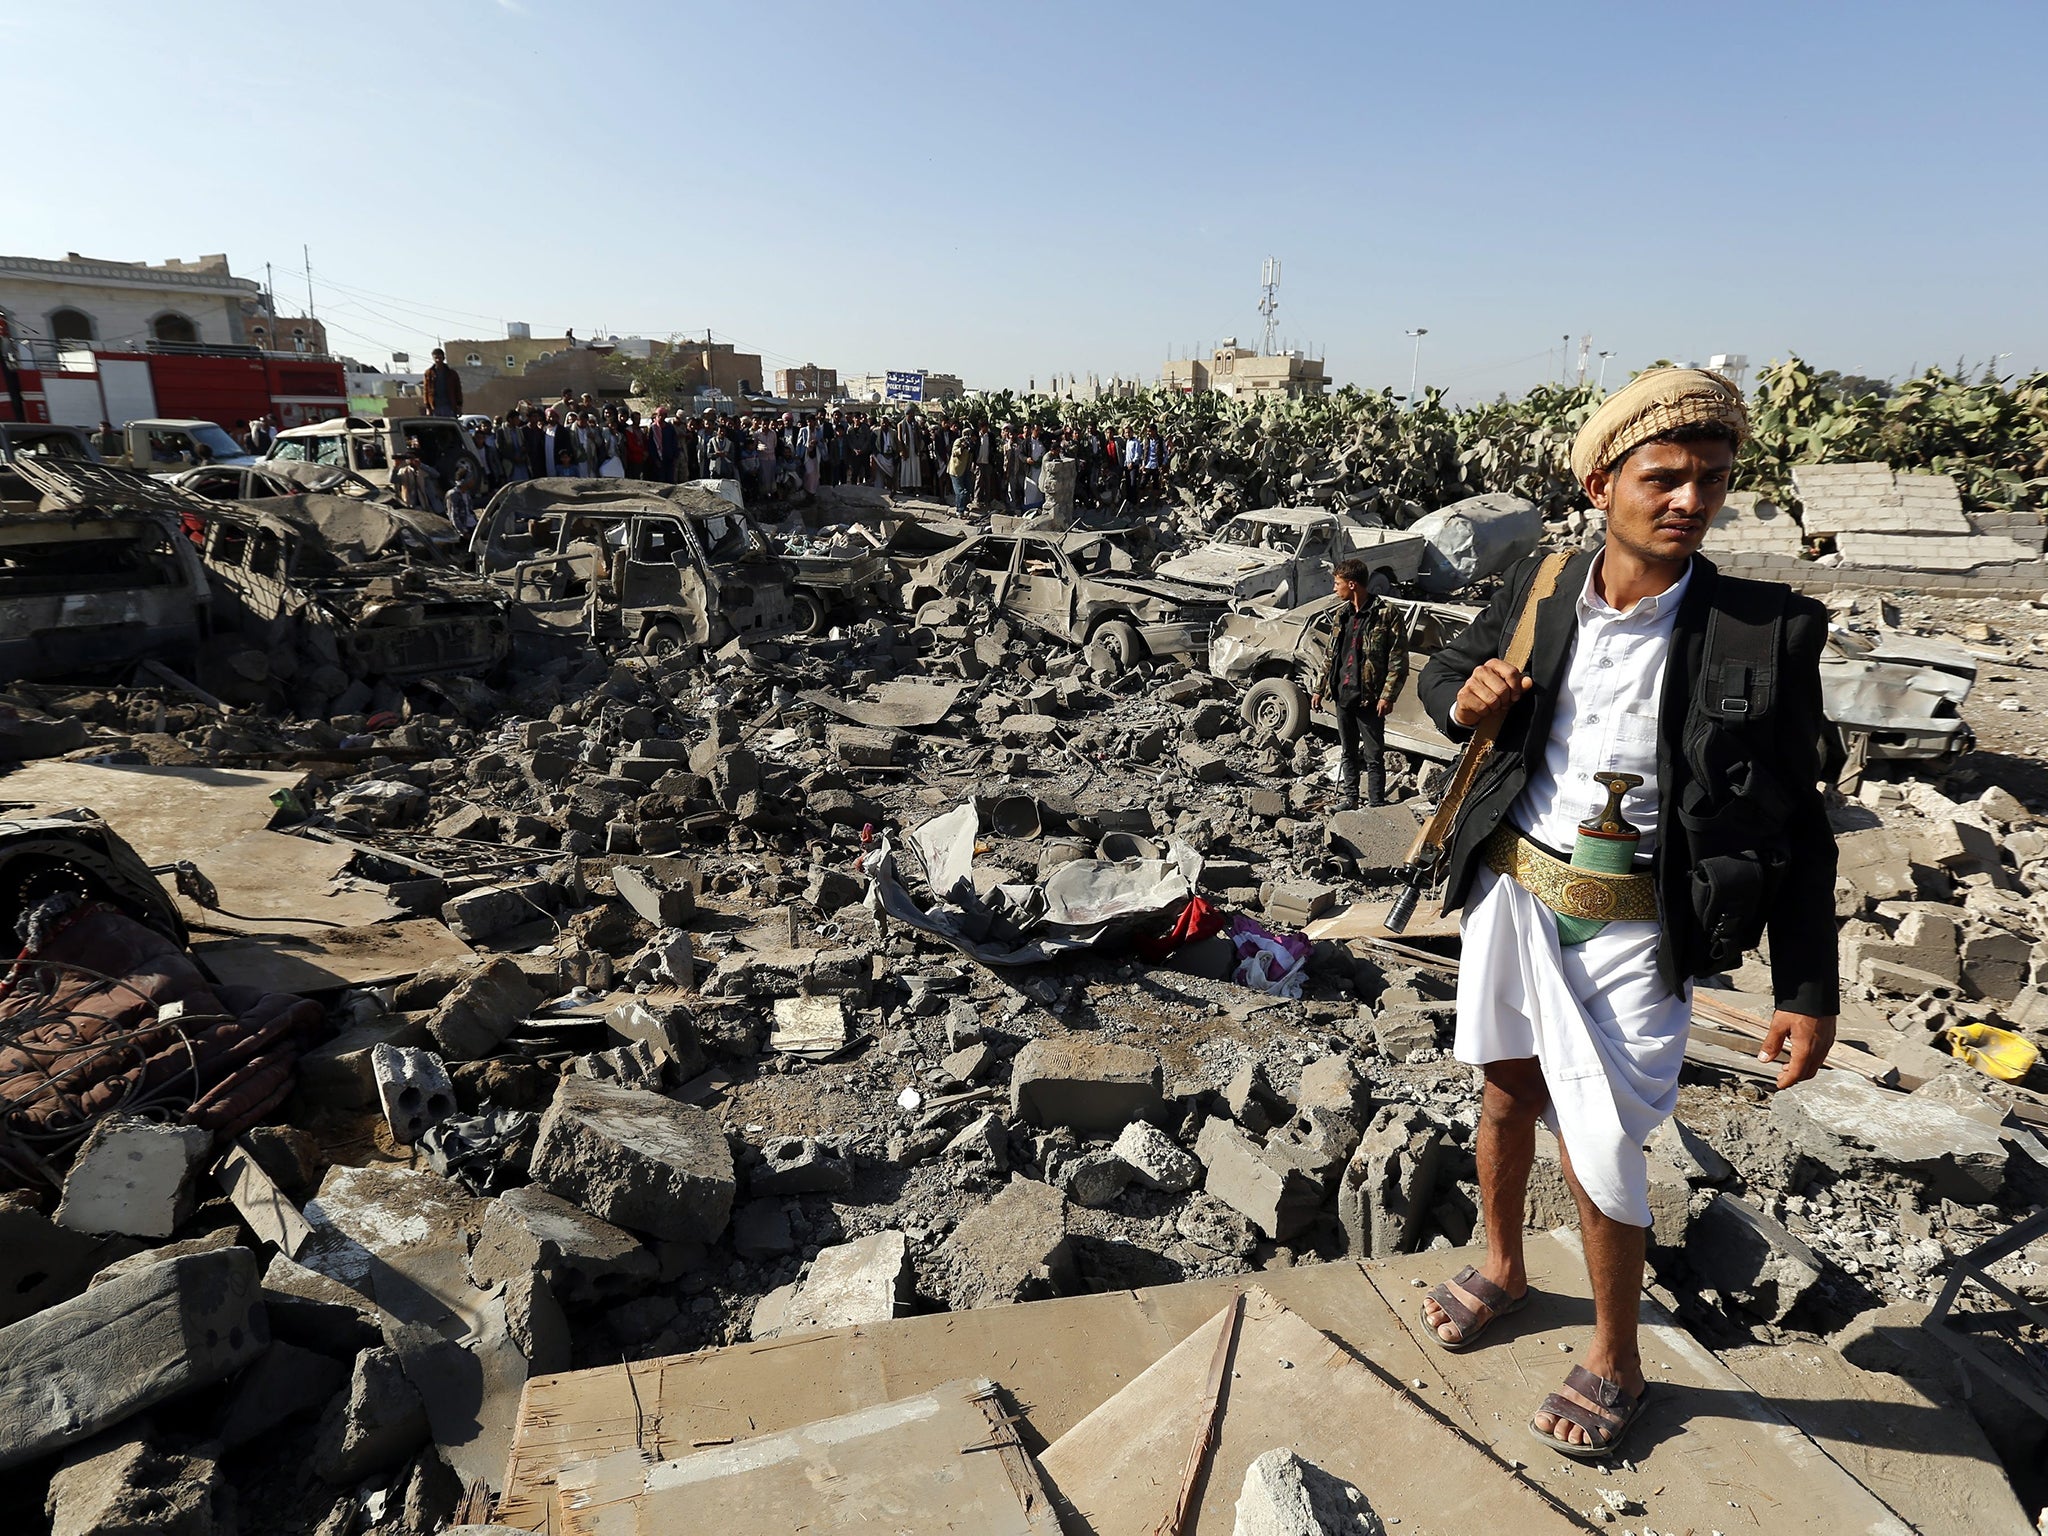 A member of the Houthi militia near vehicles destroyed
by a Saudi air strike in Sanaa yesterday